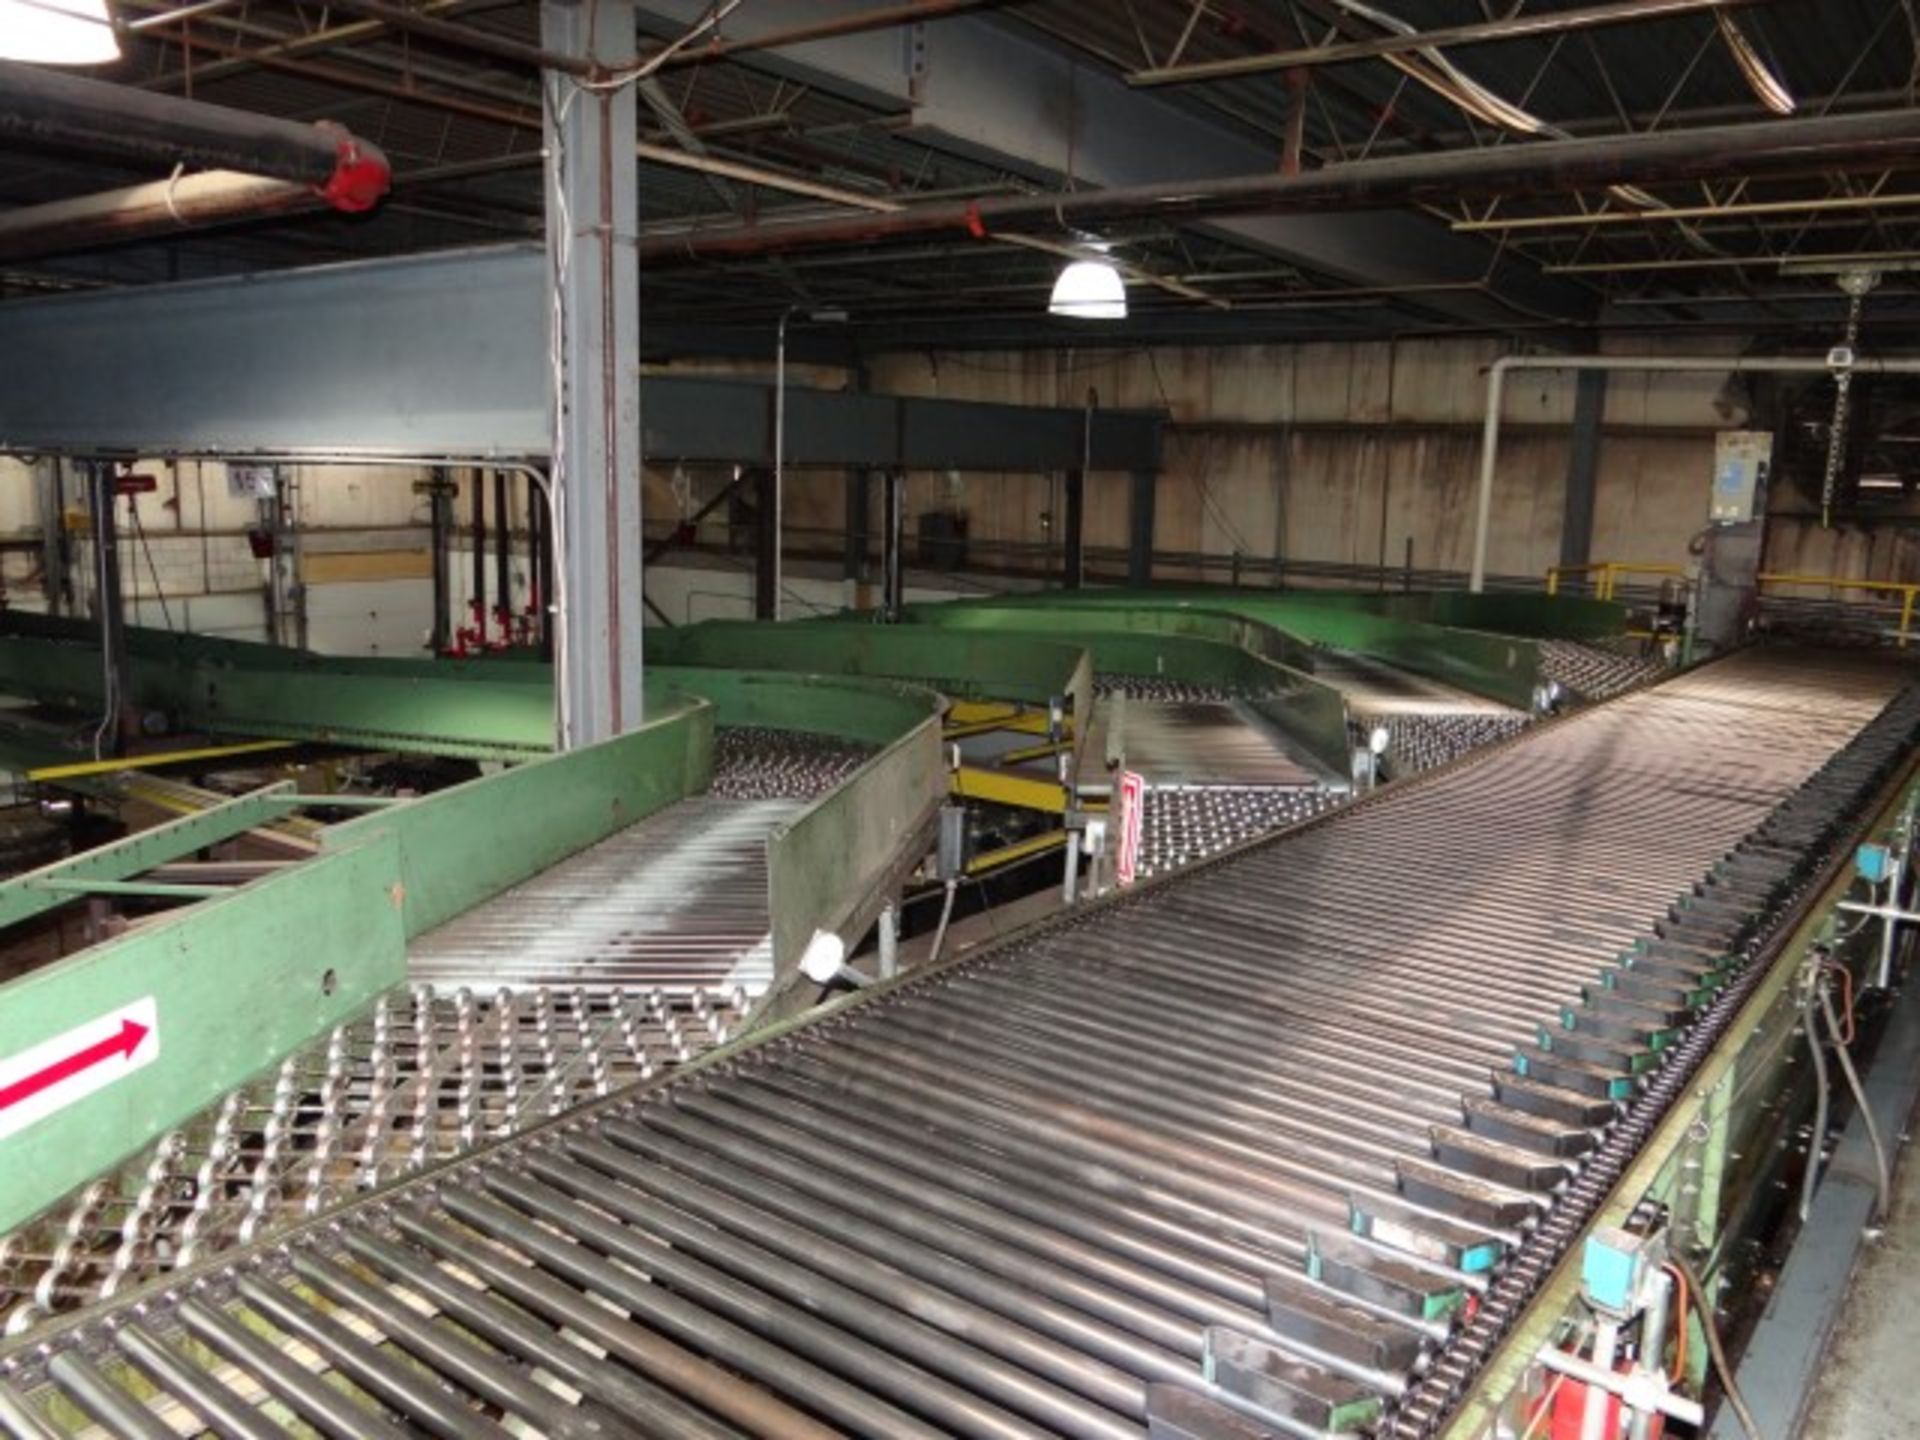 Sortation Line Conveyor, Two Controls, and 6 Drop Down Conveyors - Image 13 of 22